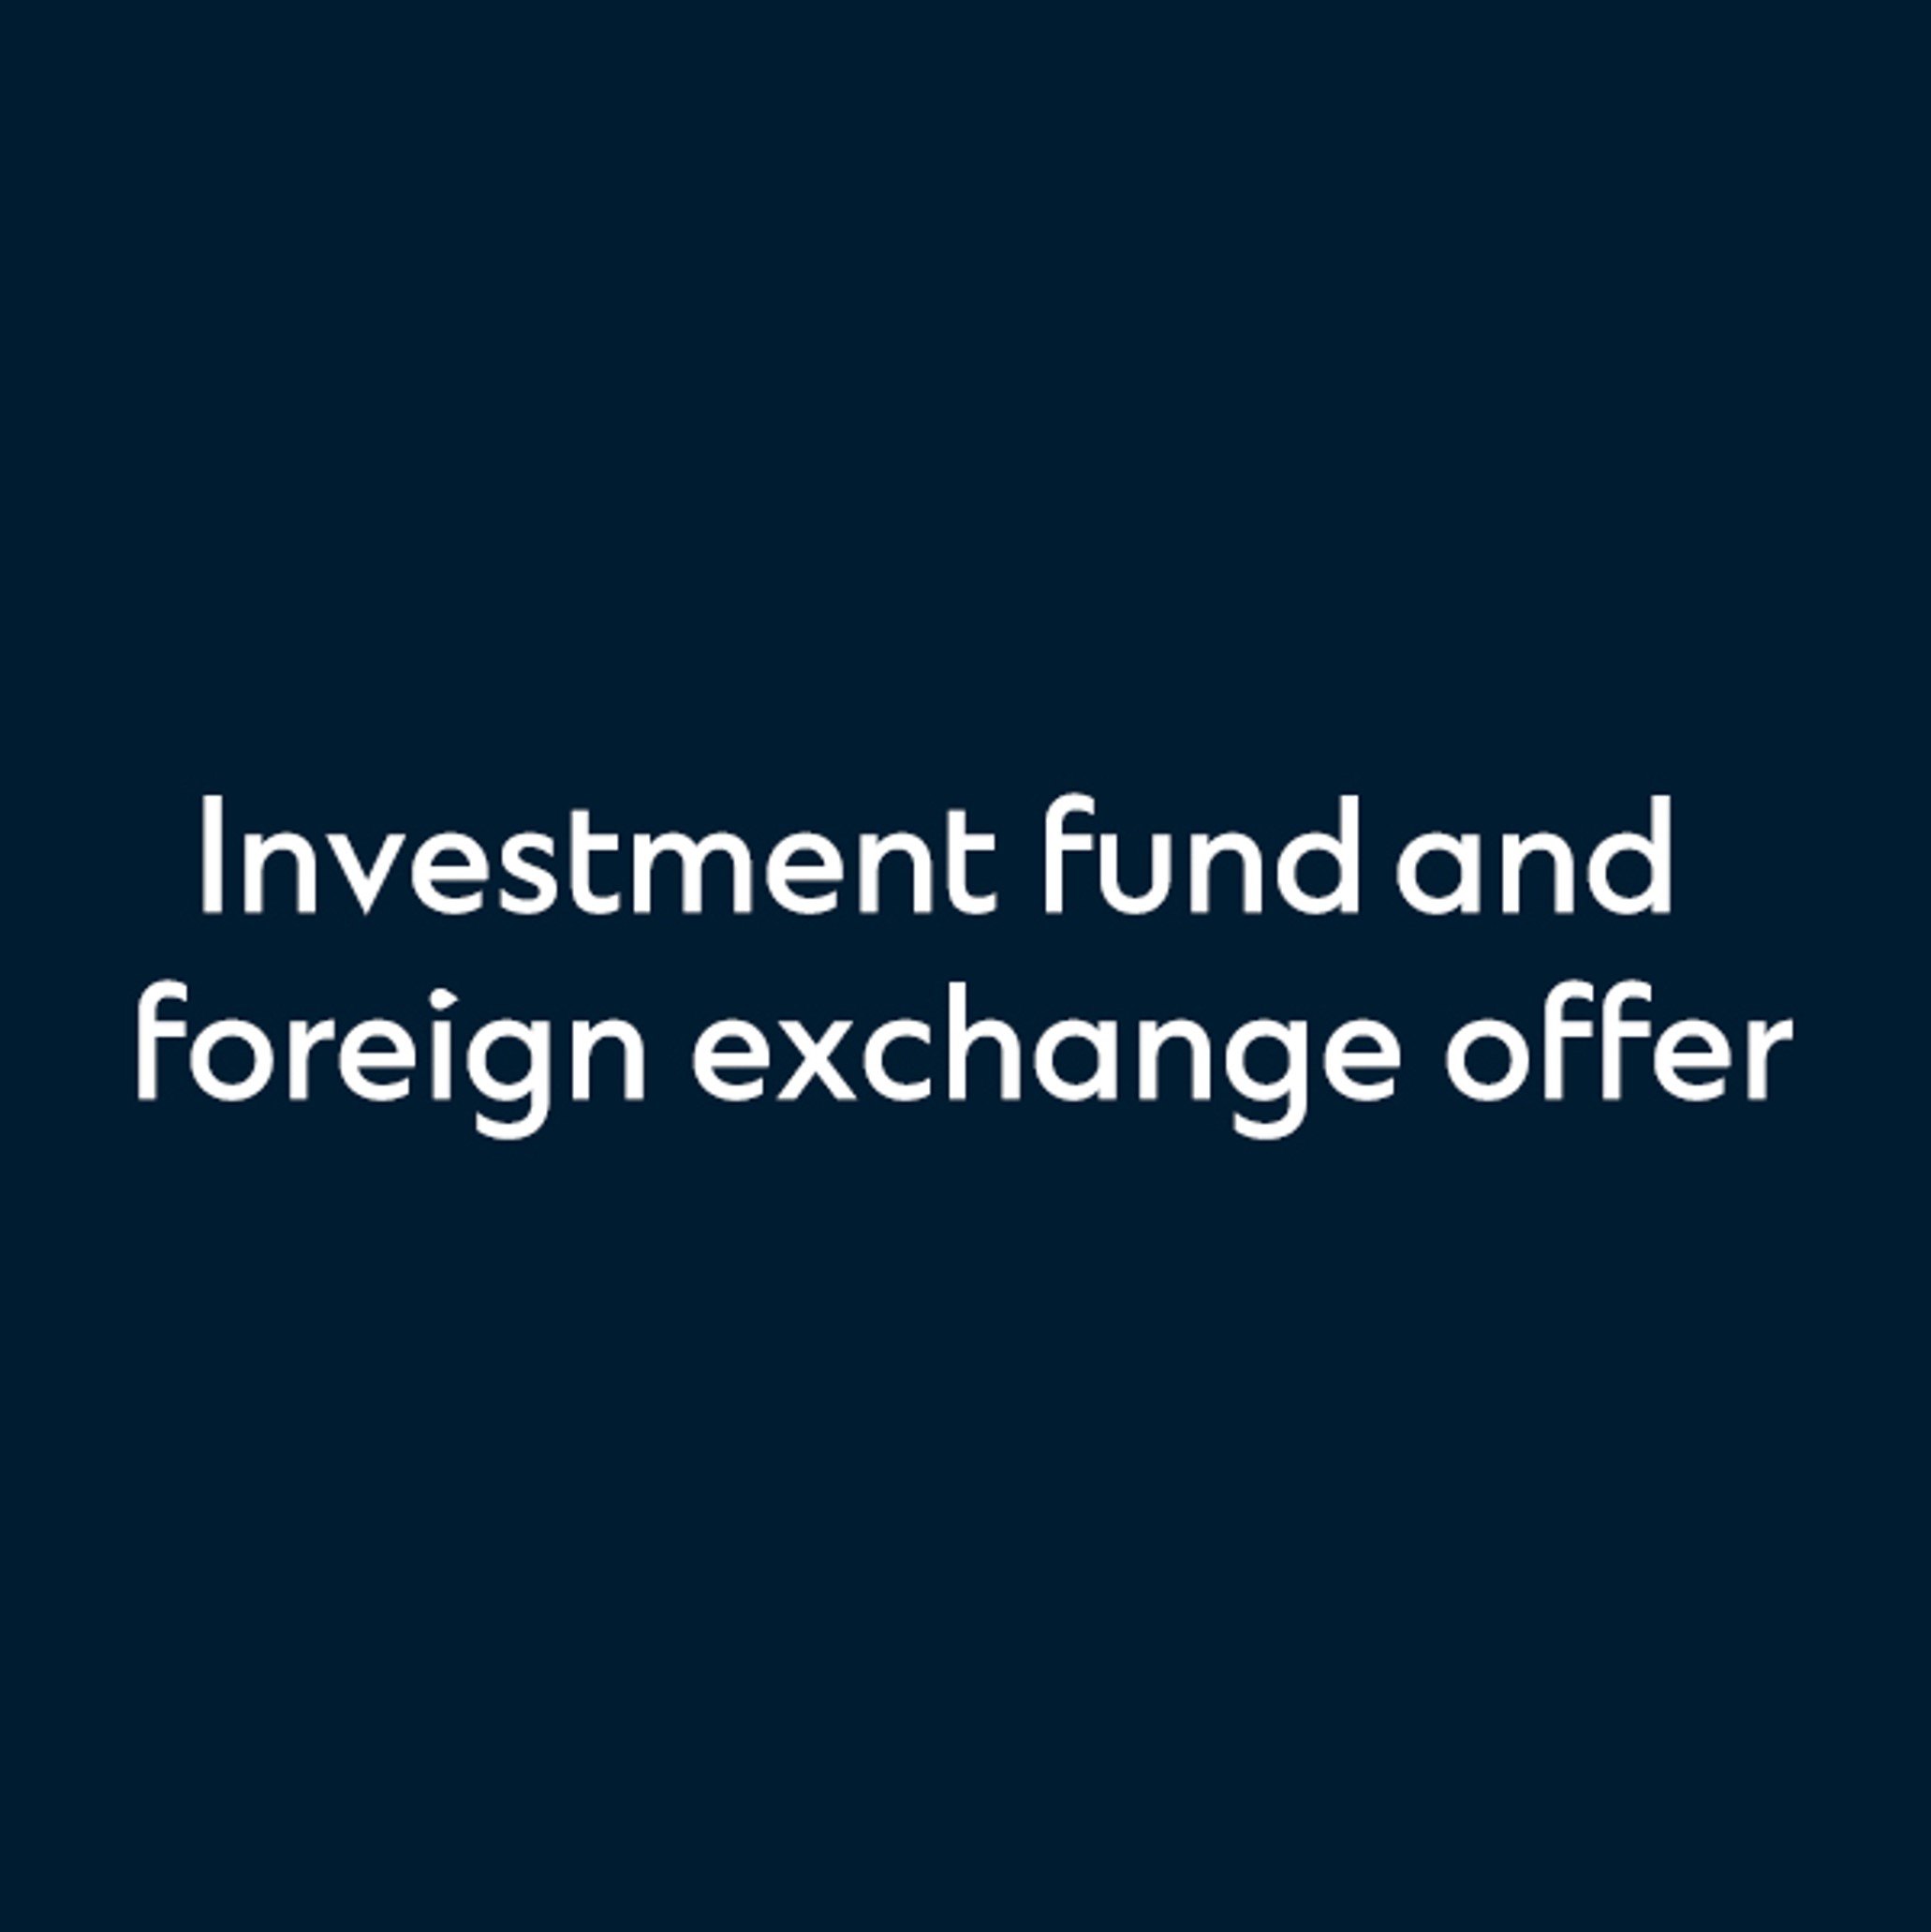 Investment fund and foreign exchange offer